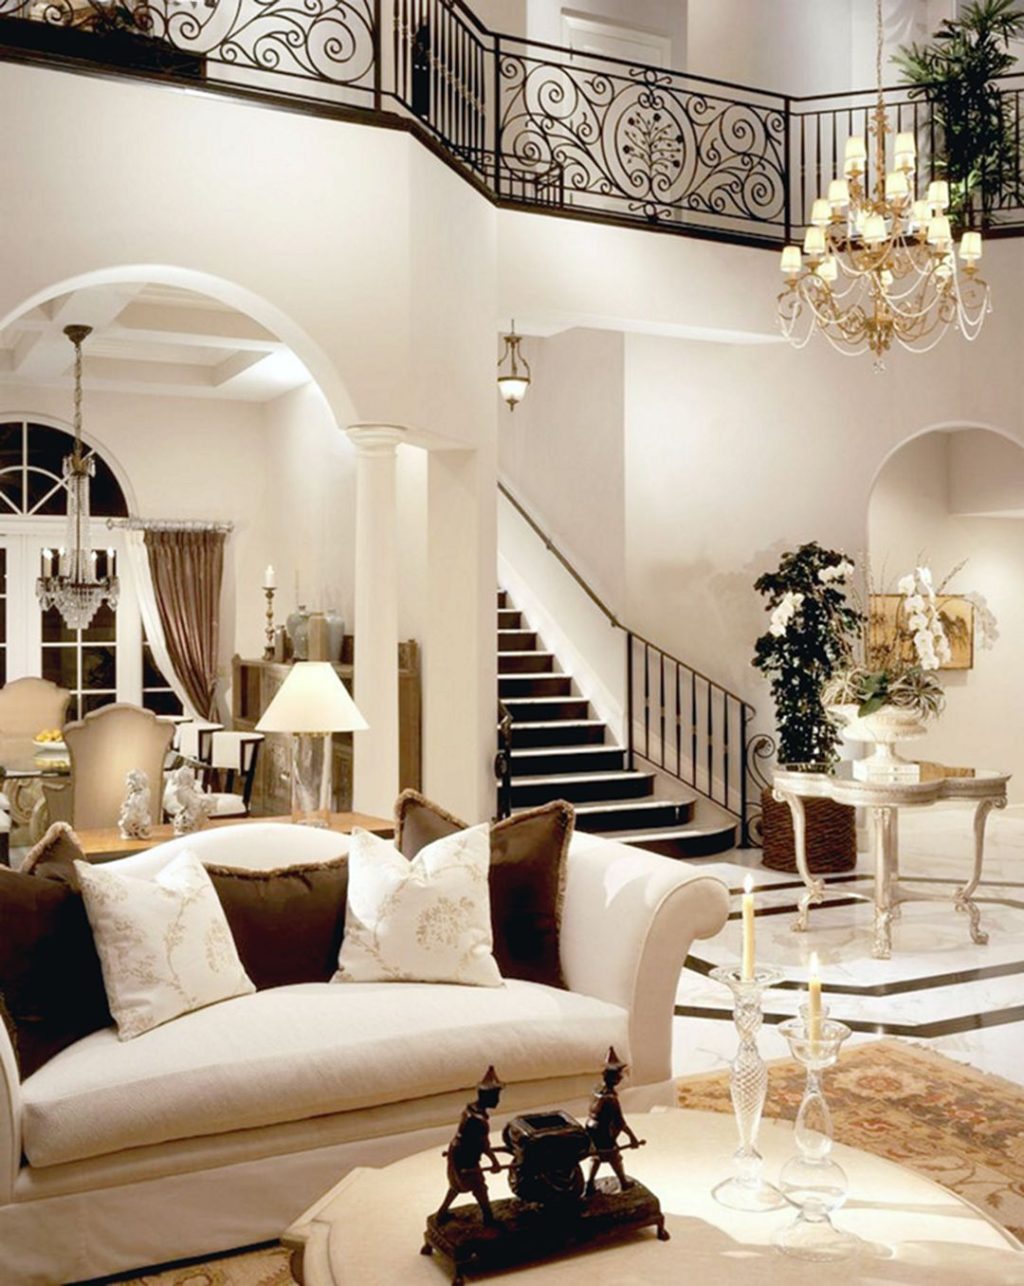 Classic Cream And Black Luxury Living Room With Classic Style